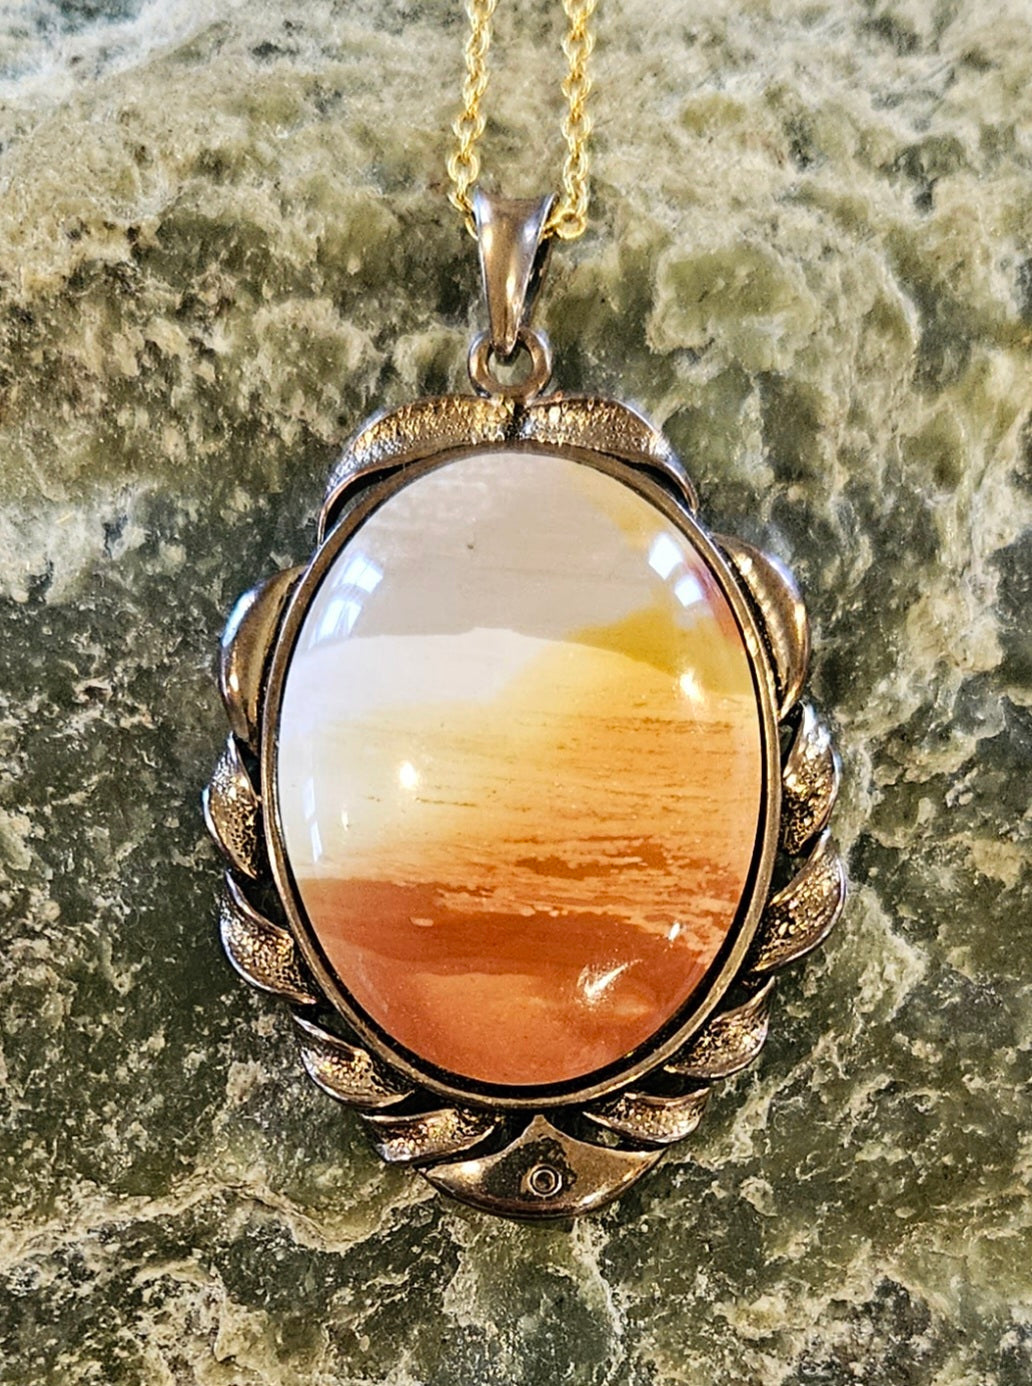 Necklace of Mookaite from Western Australia. The layering of colors from red, orange, yellow, white and tan create a scene like a sunset on the beach. I spent some time orienting the rough stone in the saw to get this arrangement of colors and hand polished this stone to a 40x30mm cabochon, set in gold plated setting with 19 inch chain.